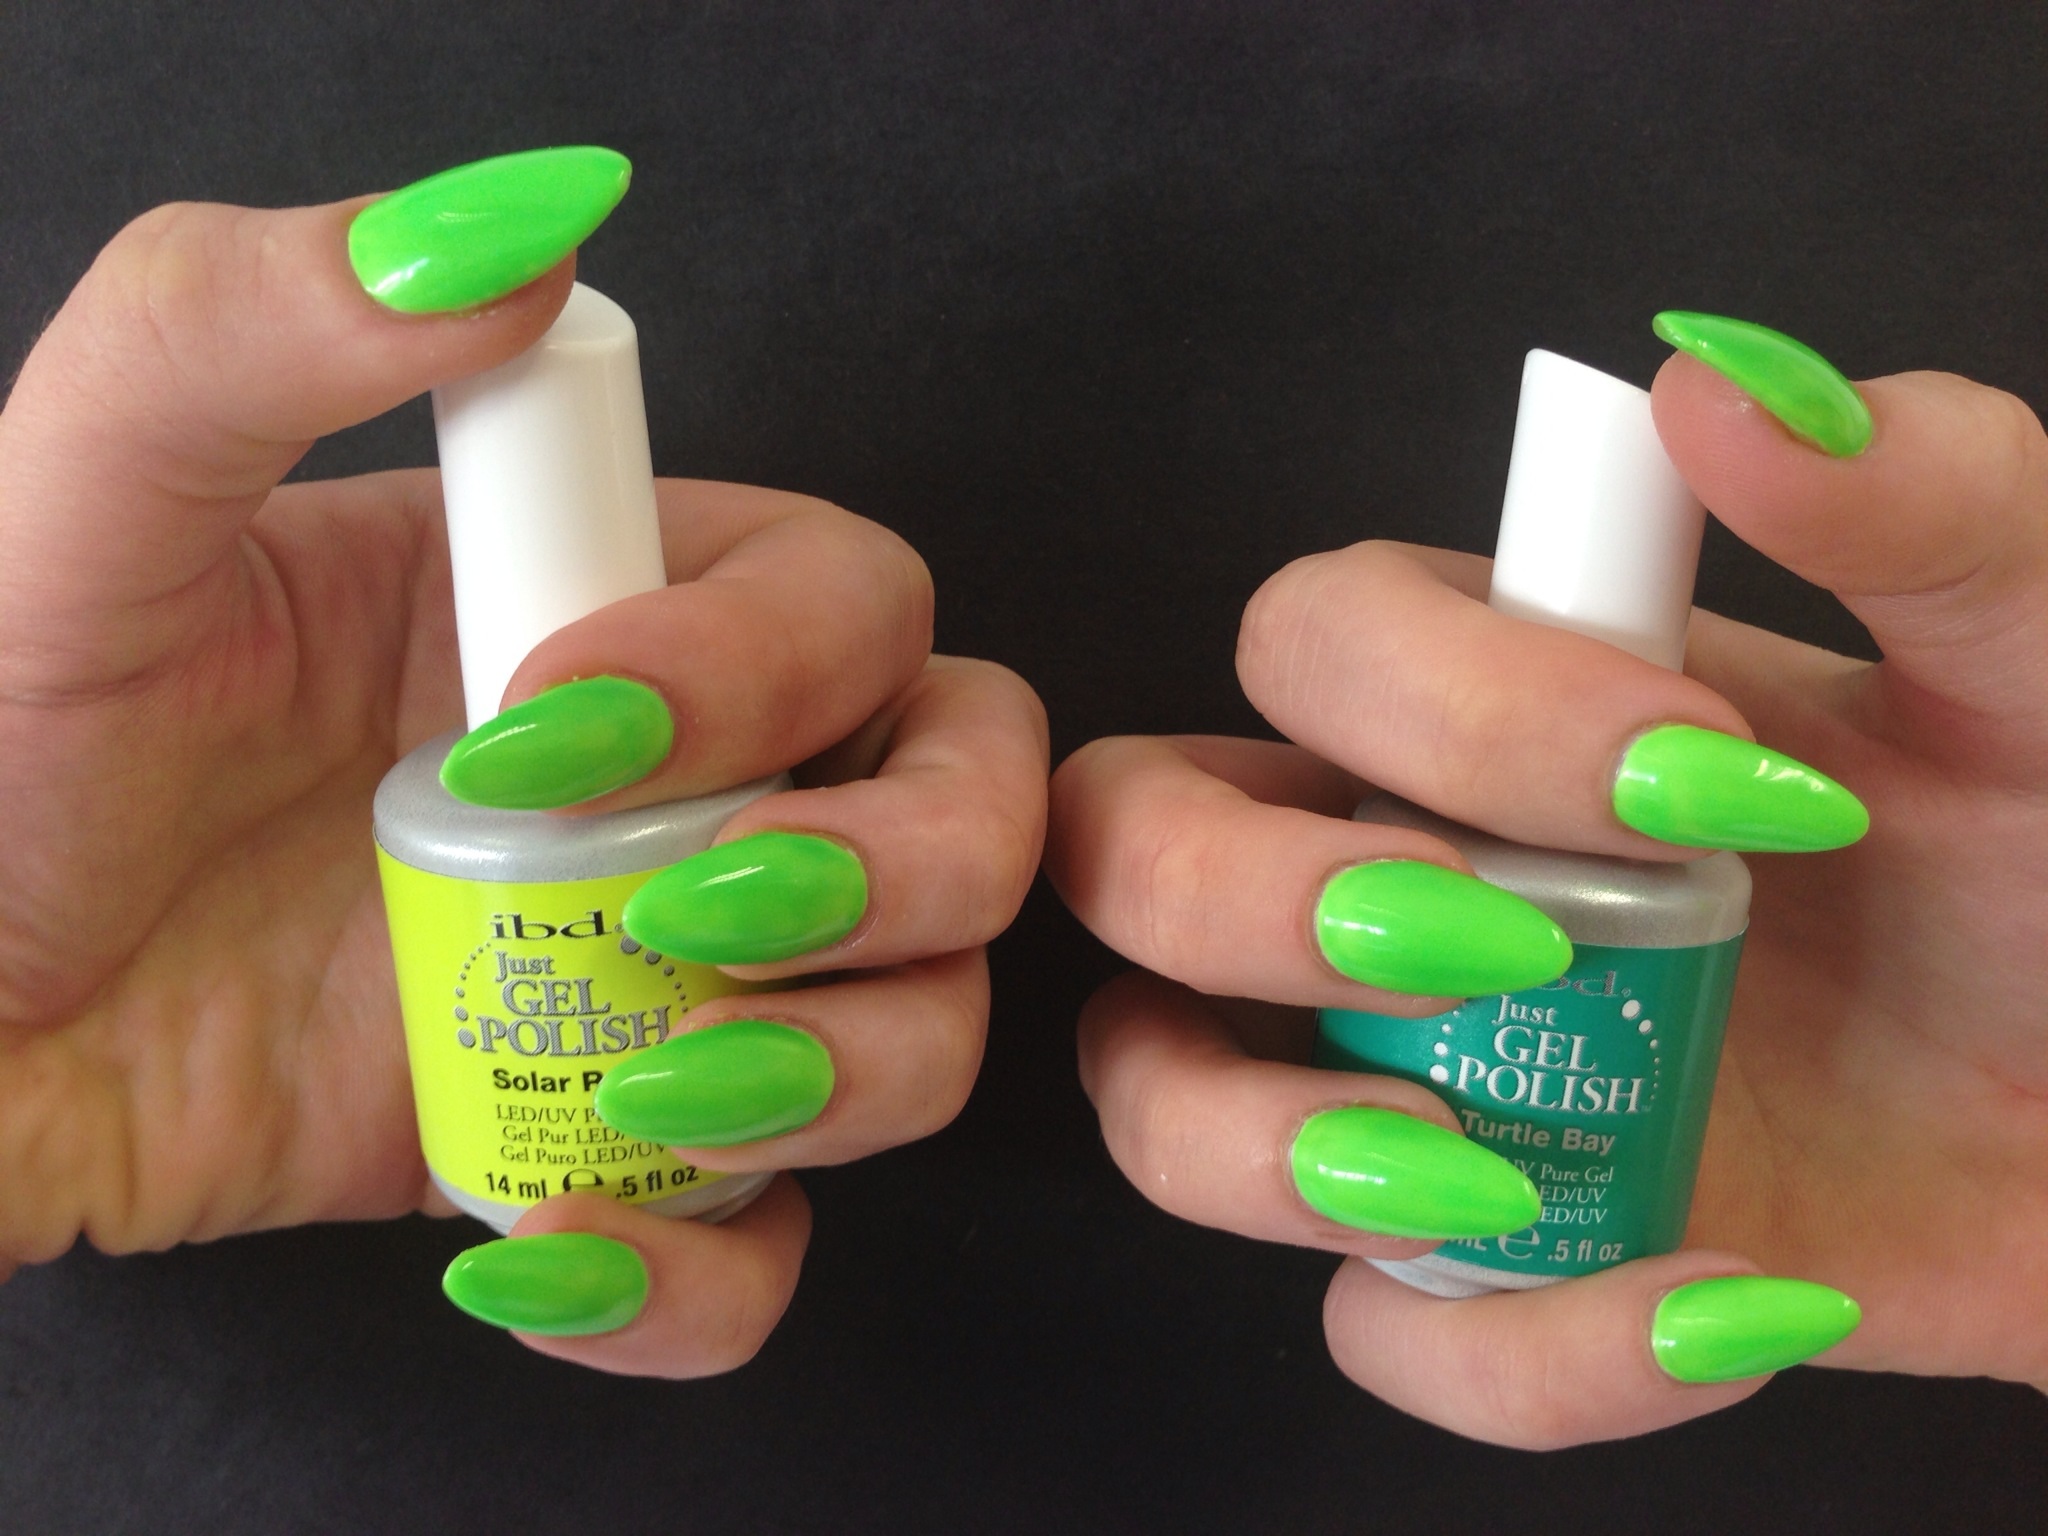 Get the look - Step by step guide to recreating Jessie J vibrant green nail...